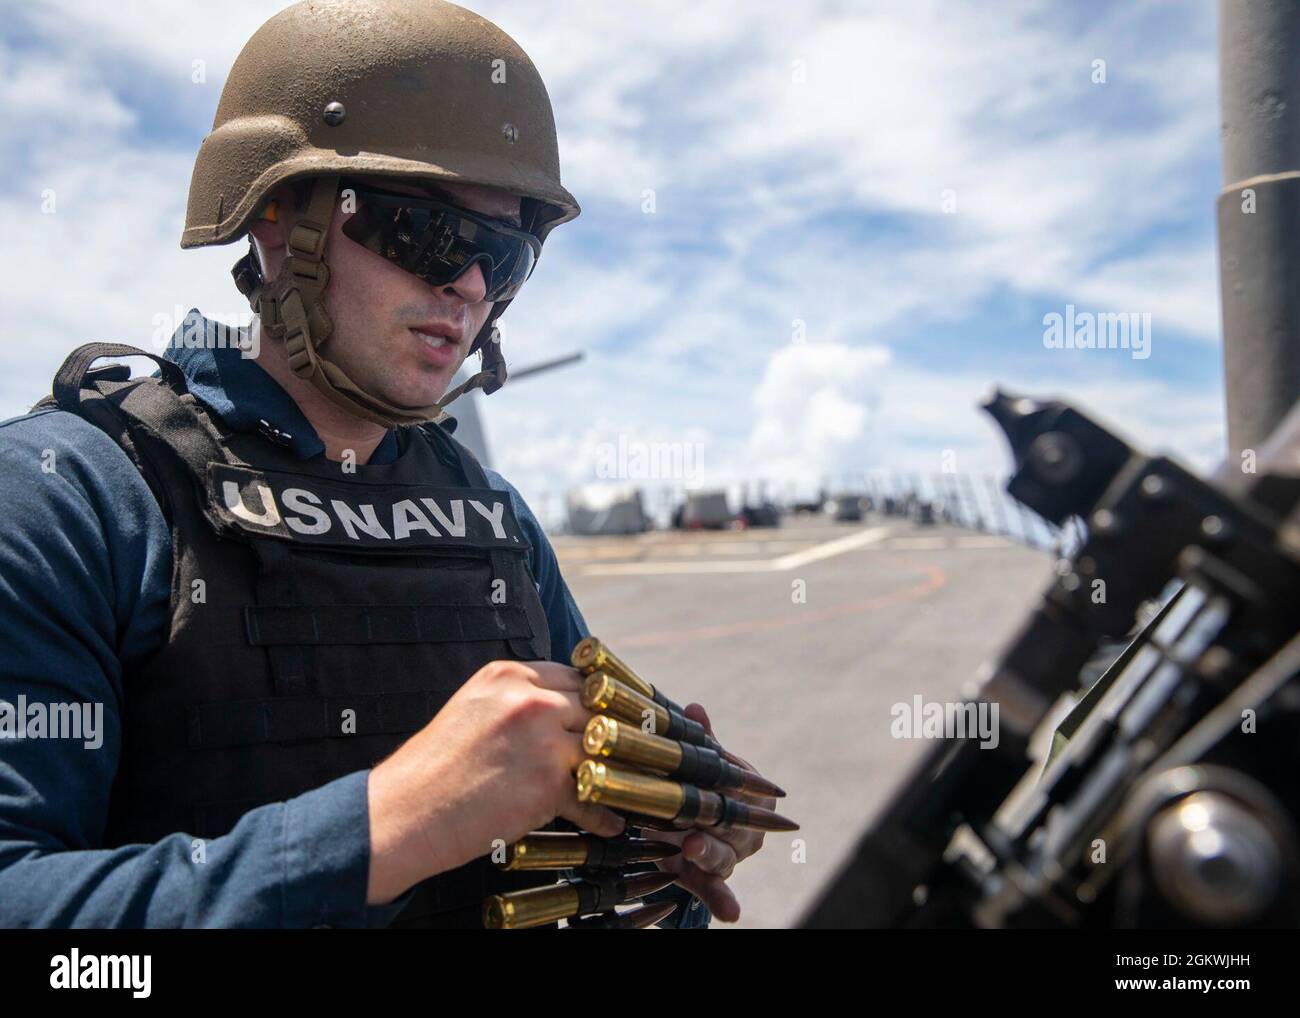 EAST CHINA SEA (July 10, 2021) Retail Specialist 3rd Class Christian Shields, from Stuart, Fla., reloads a .50 cal. machine gun during a crew-serve weapon familiarization aboard Arleigh Burke-class guided-missile destroyer USS John S. McCain (DDG 56). McCain is assigned to Task Force 71/Destroyer Squadron (DESRON) 15, the Navy’s largest DESRON and the U.S. 7th Fleet’s principal surface force. Stock Photo